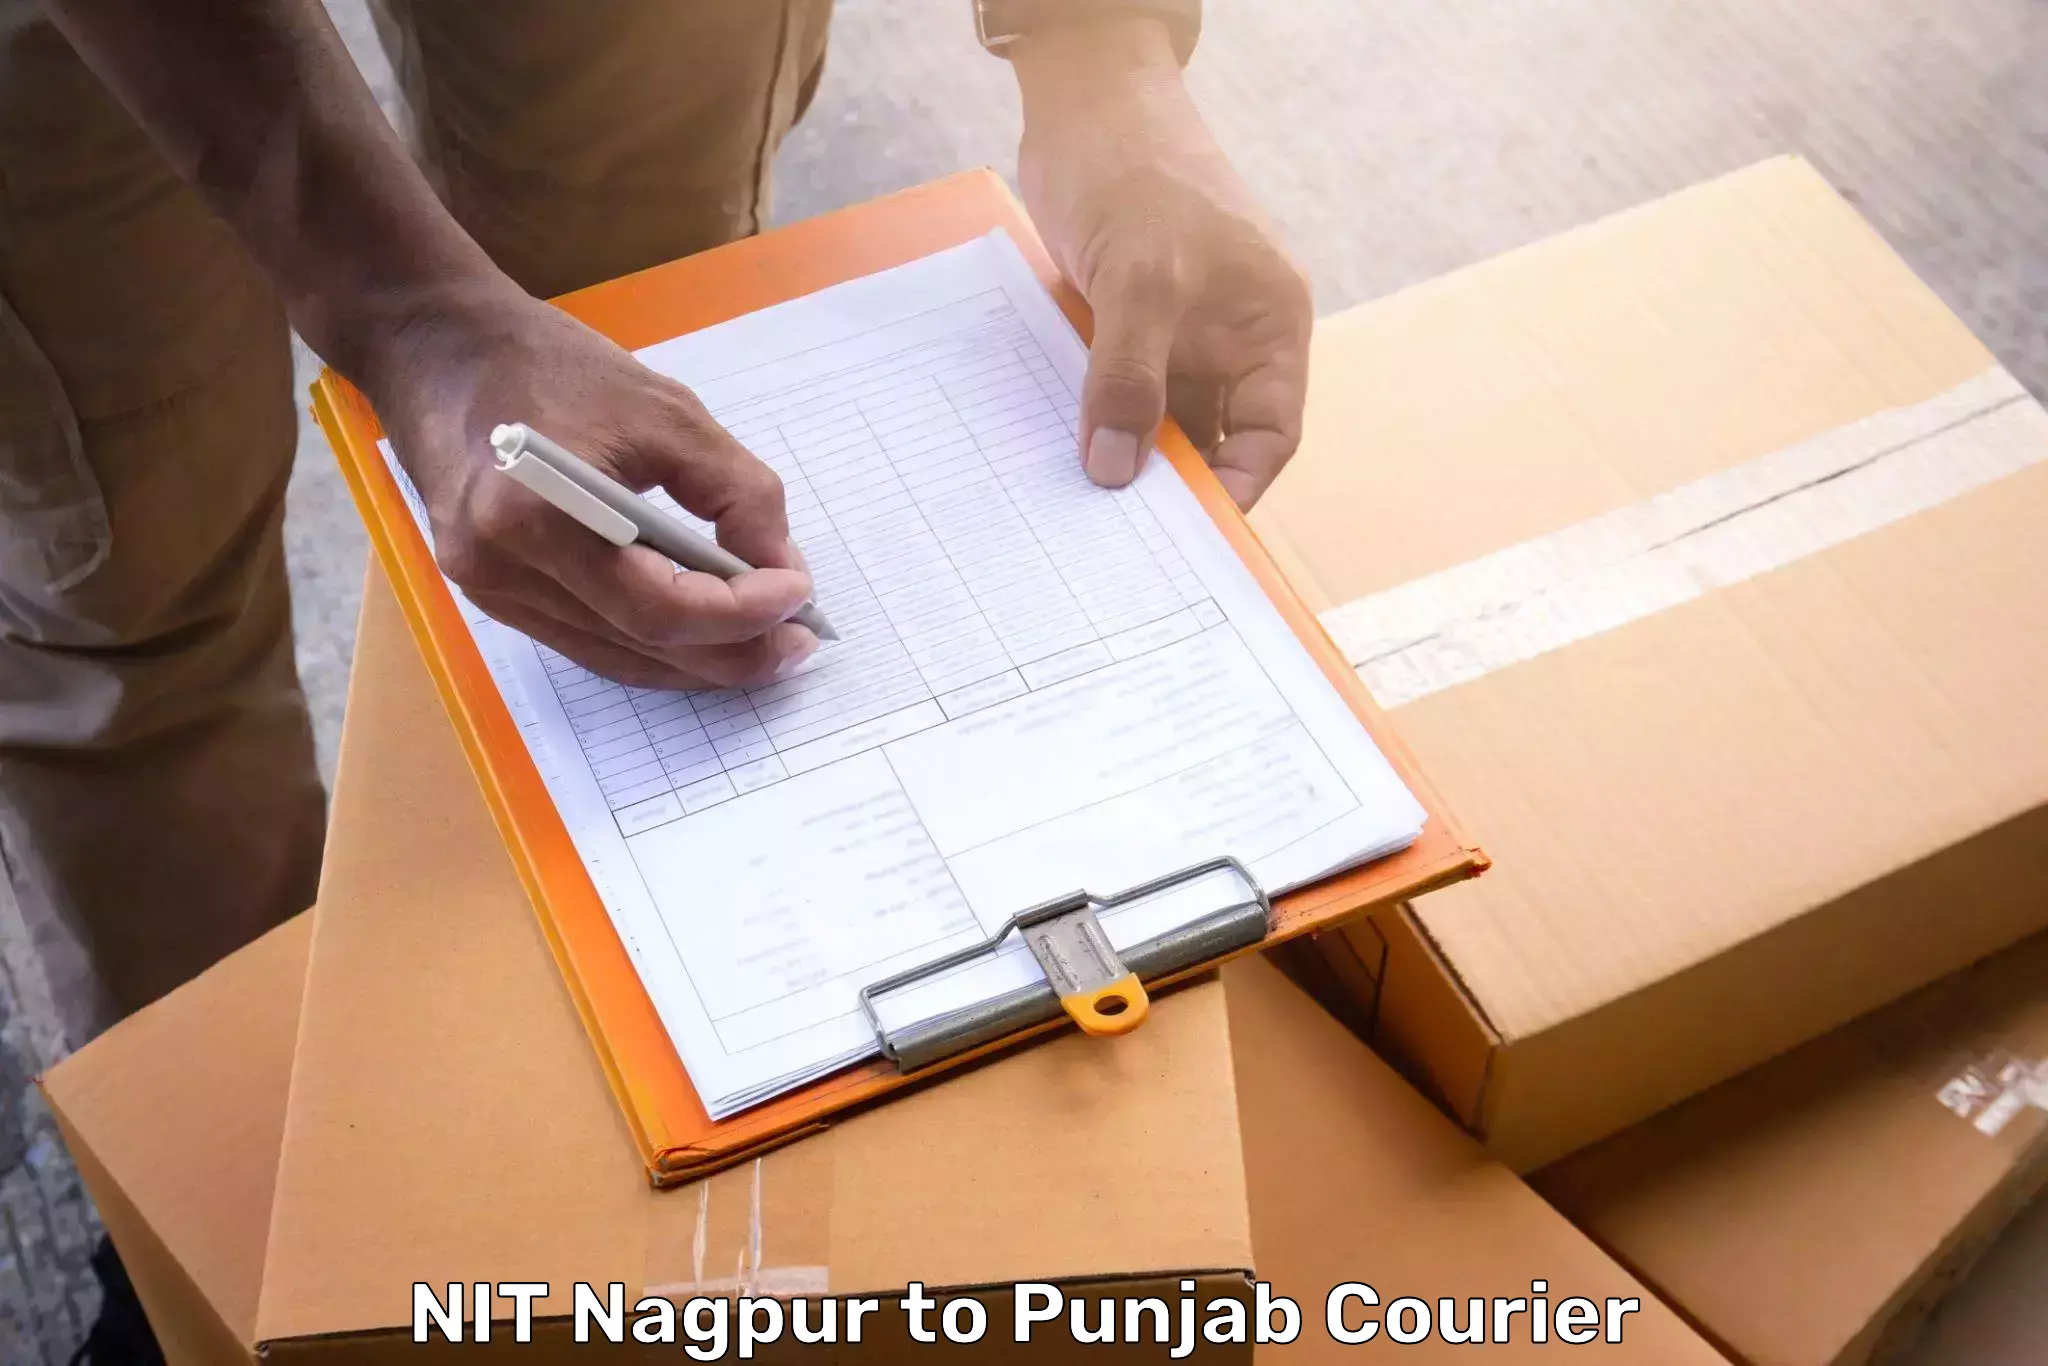 Luggage delivery providers NIT Nagpur to Mohali